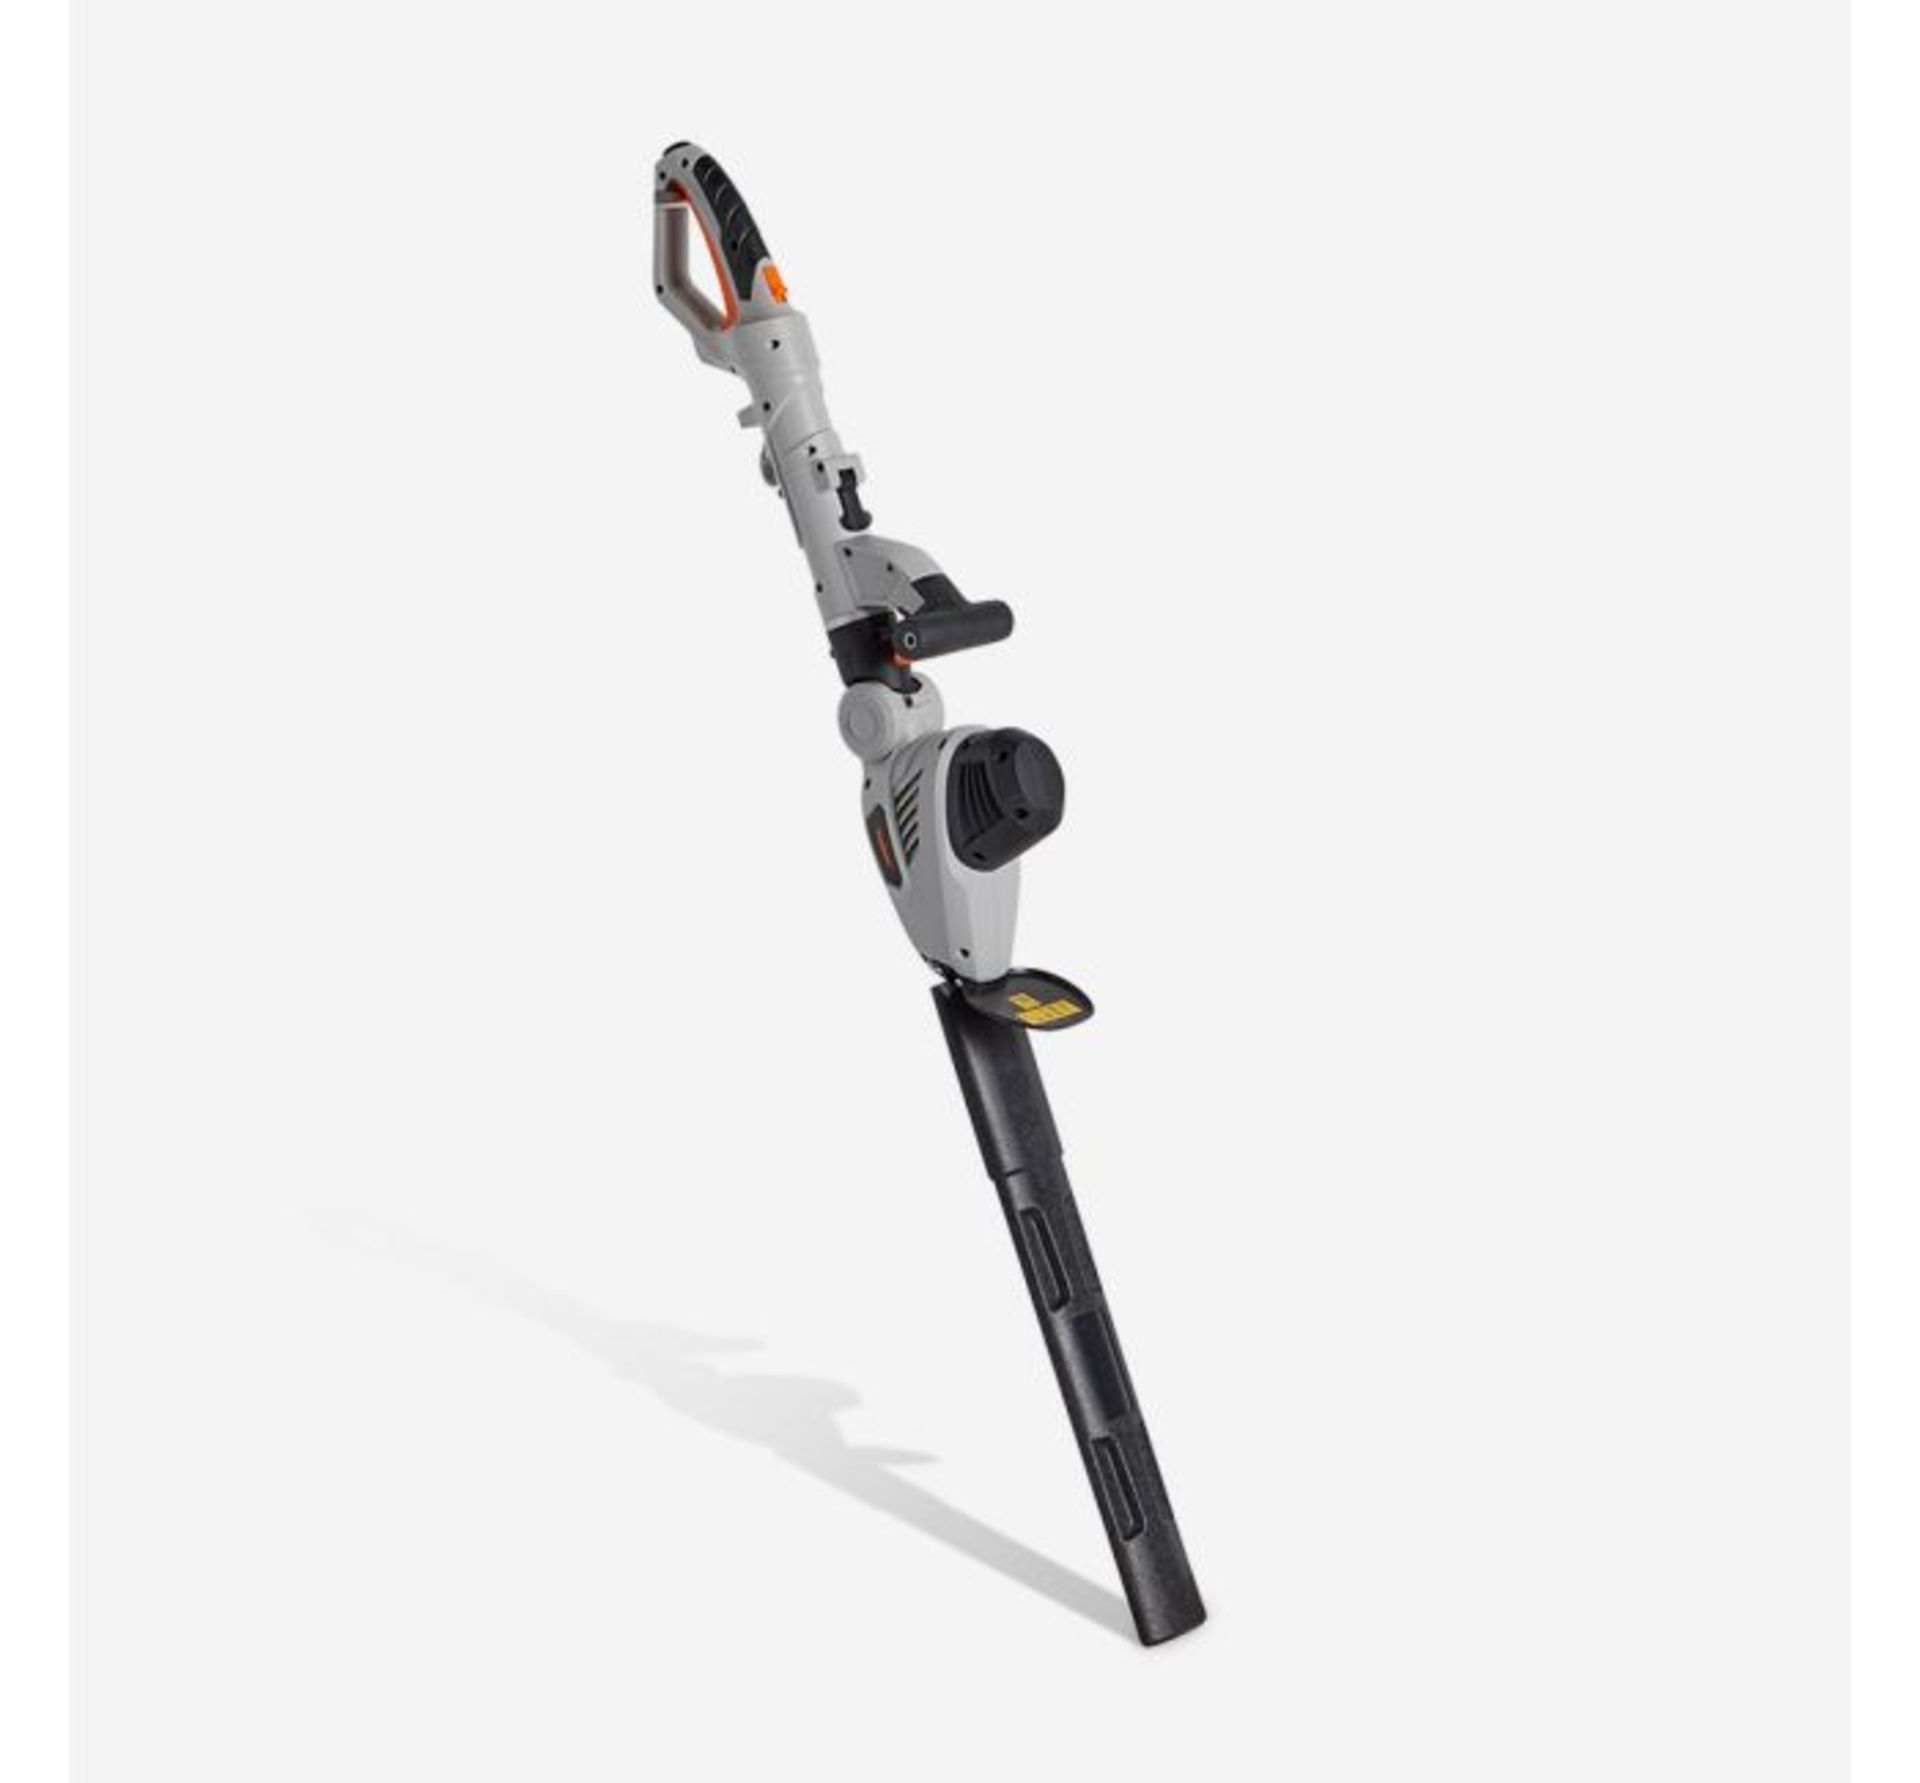 (JH42) 600W Pole Trimmer Dual action 45cm precision blades effortlessly cuts through branches ... - Image 2 of 2